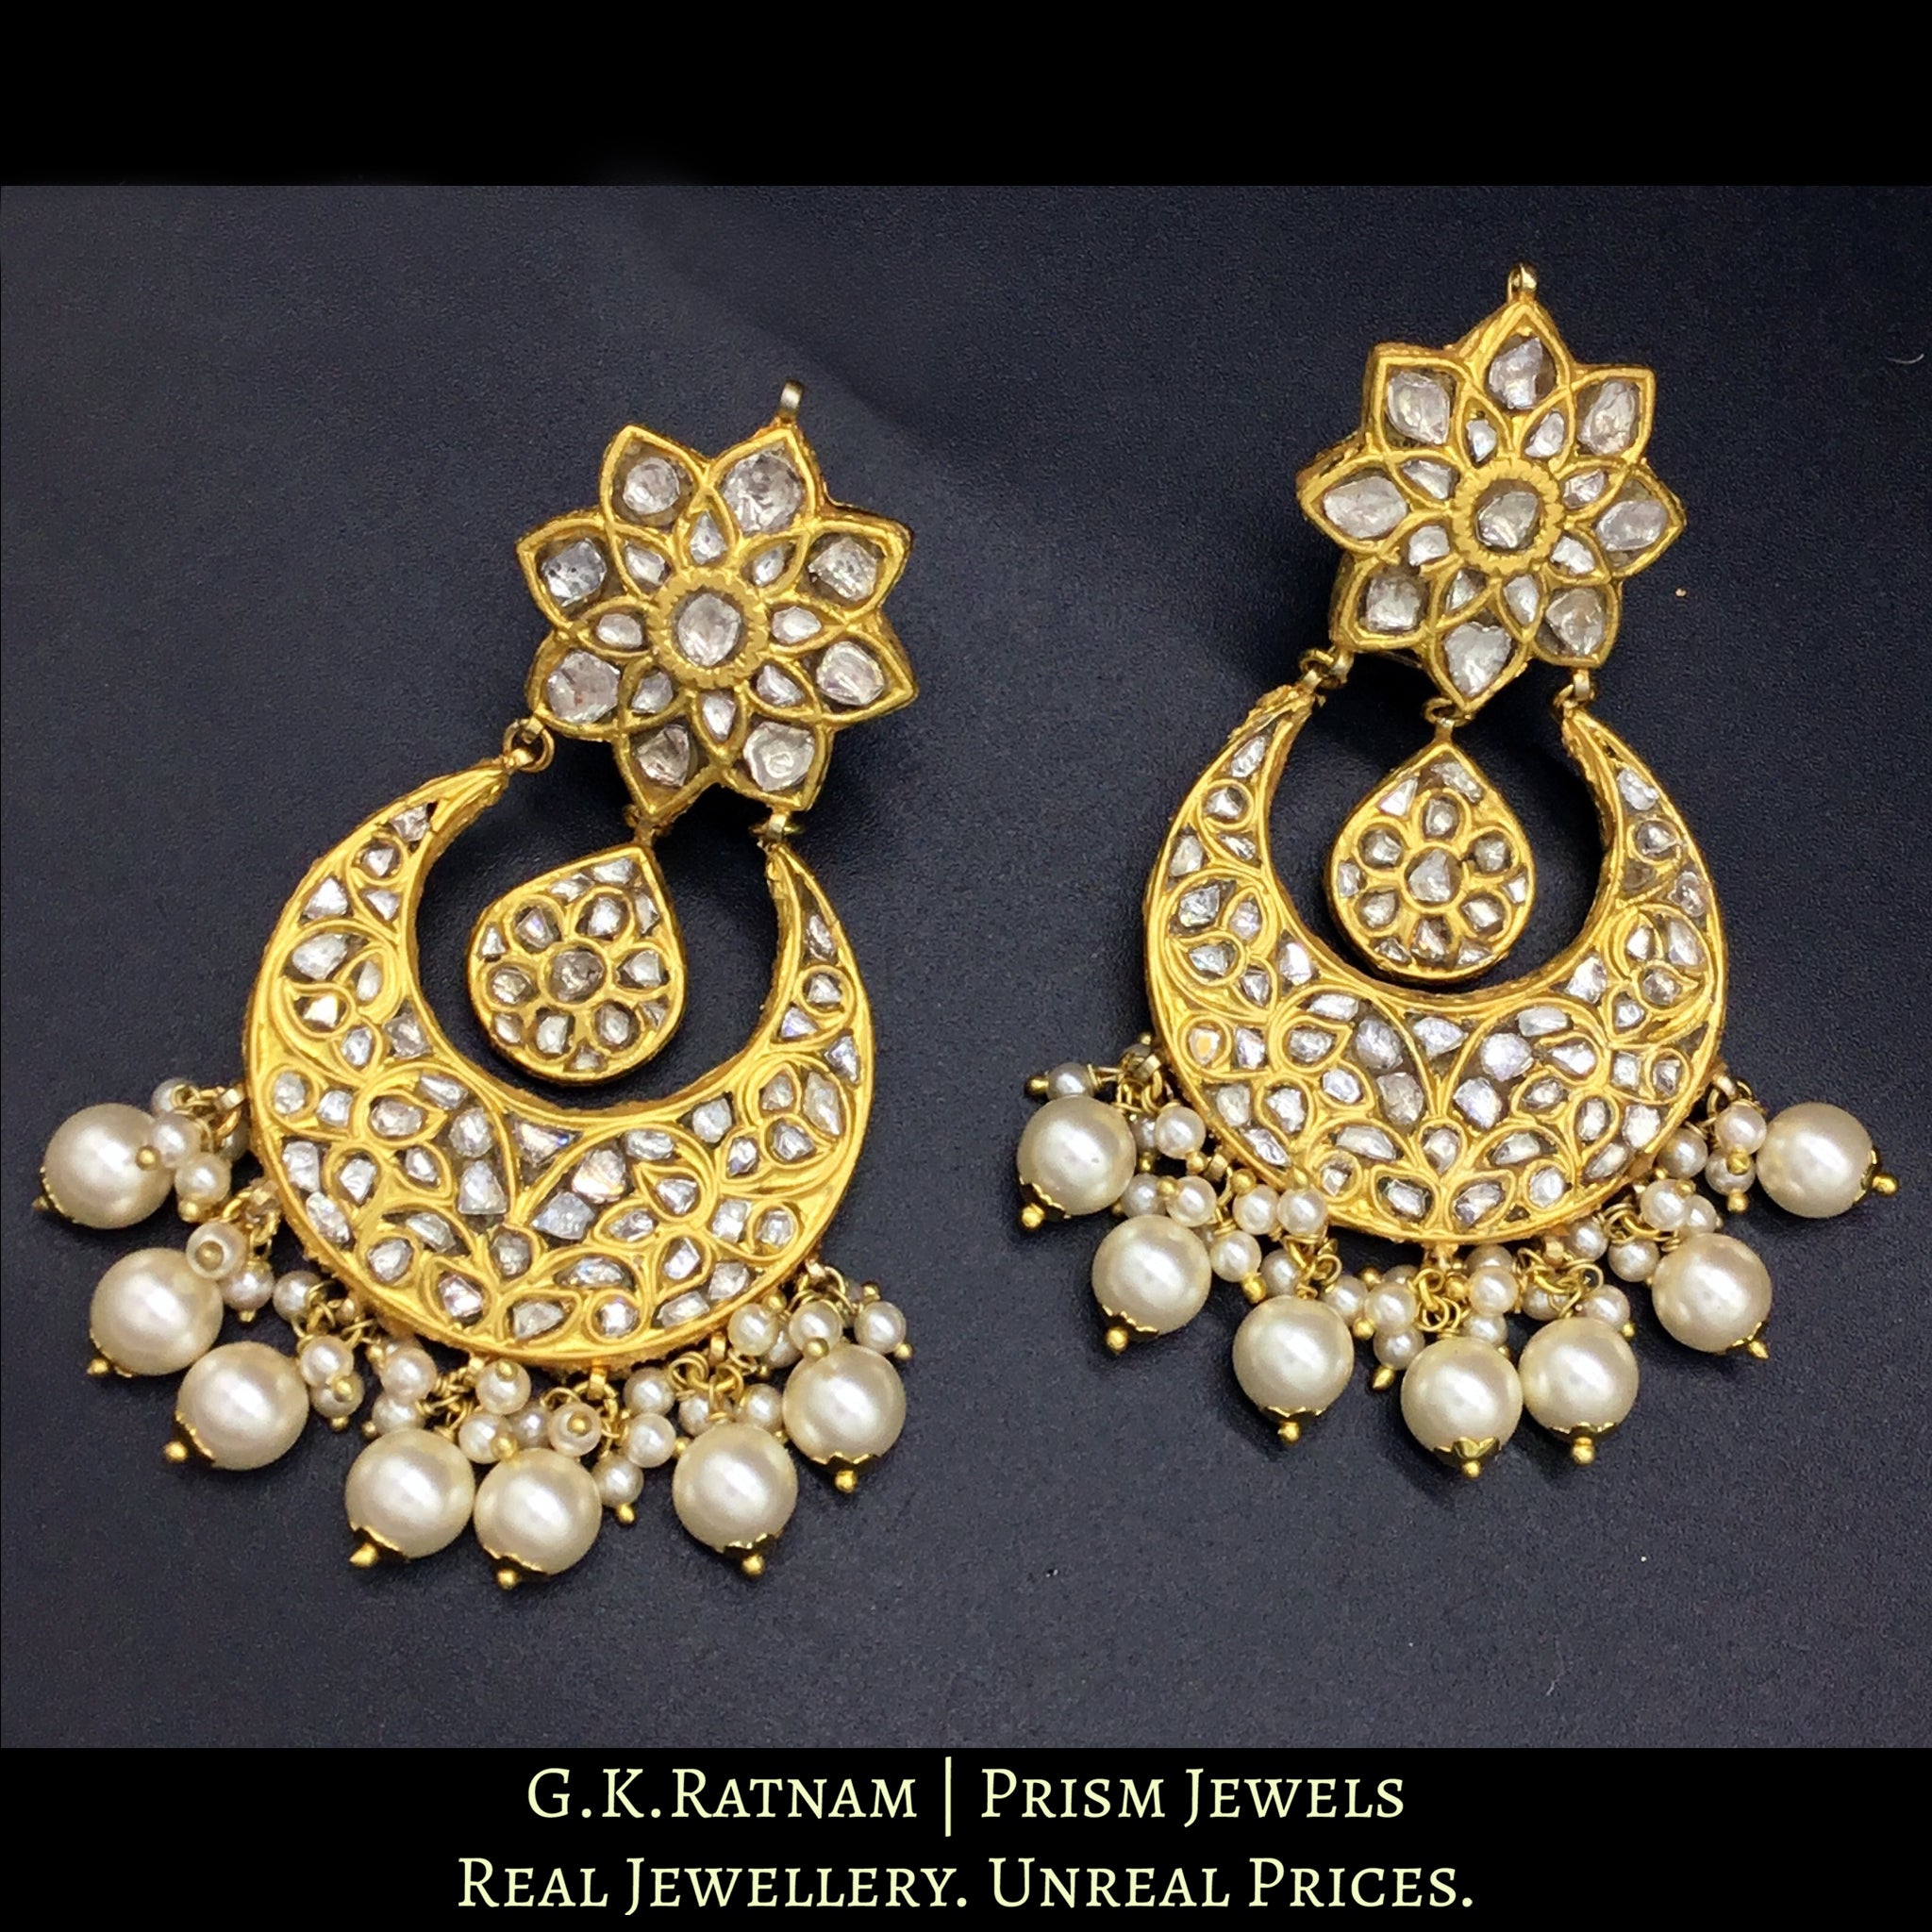 23k Gold and Diamond Polki Chand Bali Earring Pair with triple-coated shell pearls